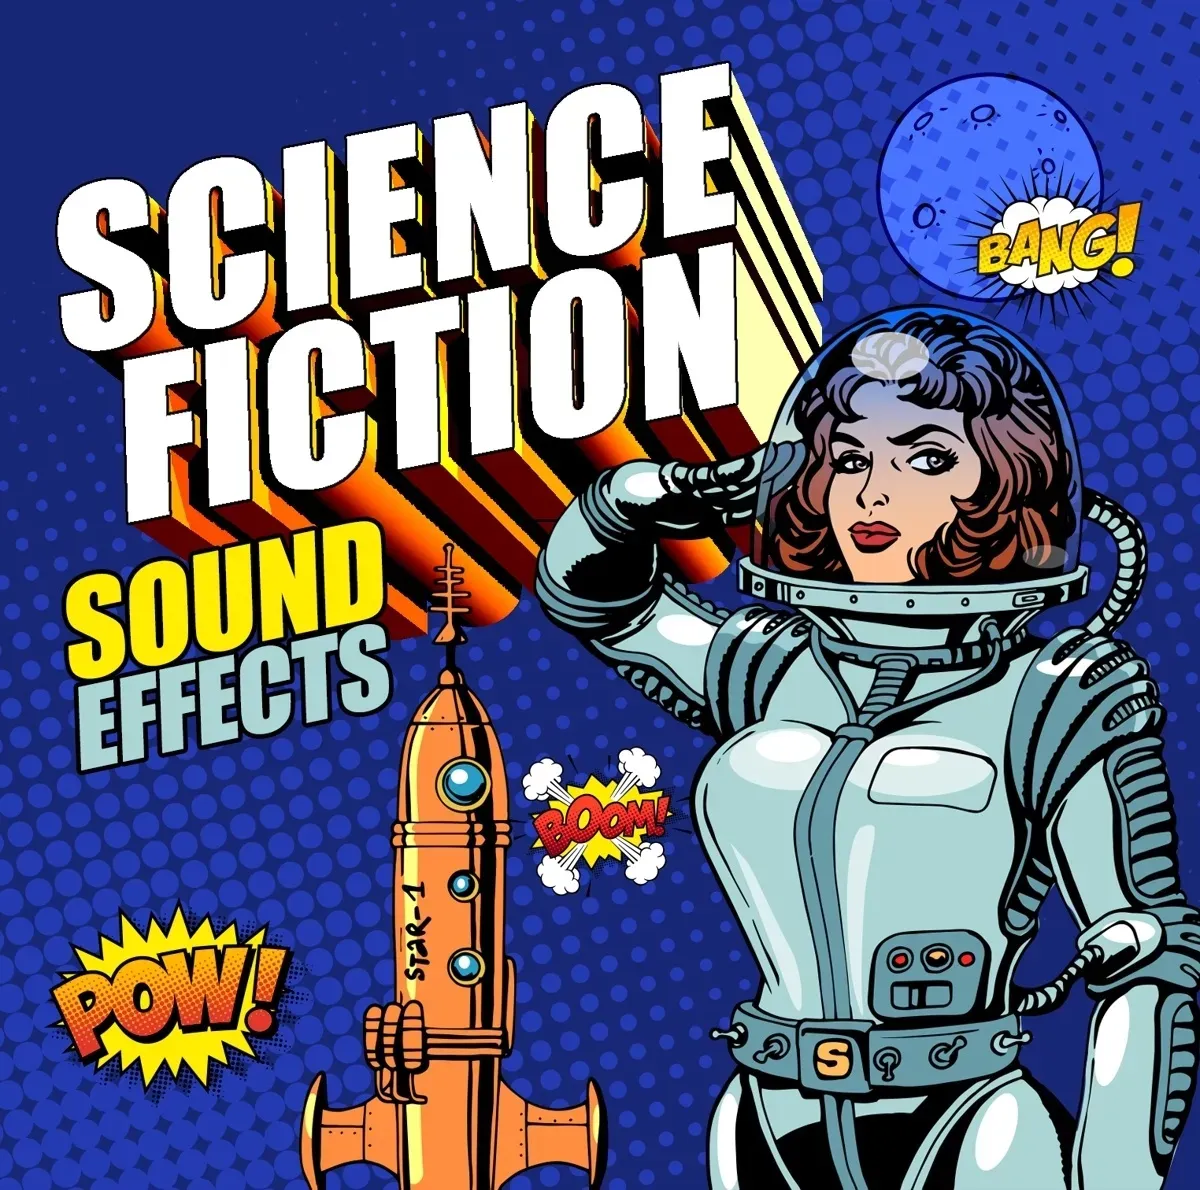 Science Fiction Sound Effects - Sound Effects. (CD)